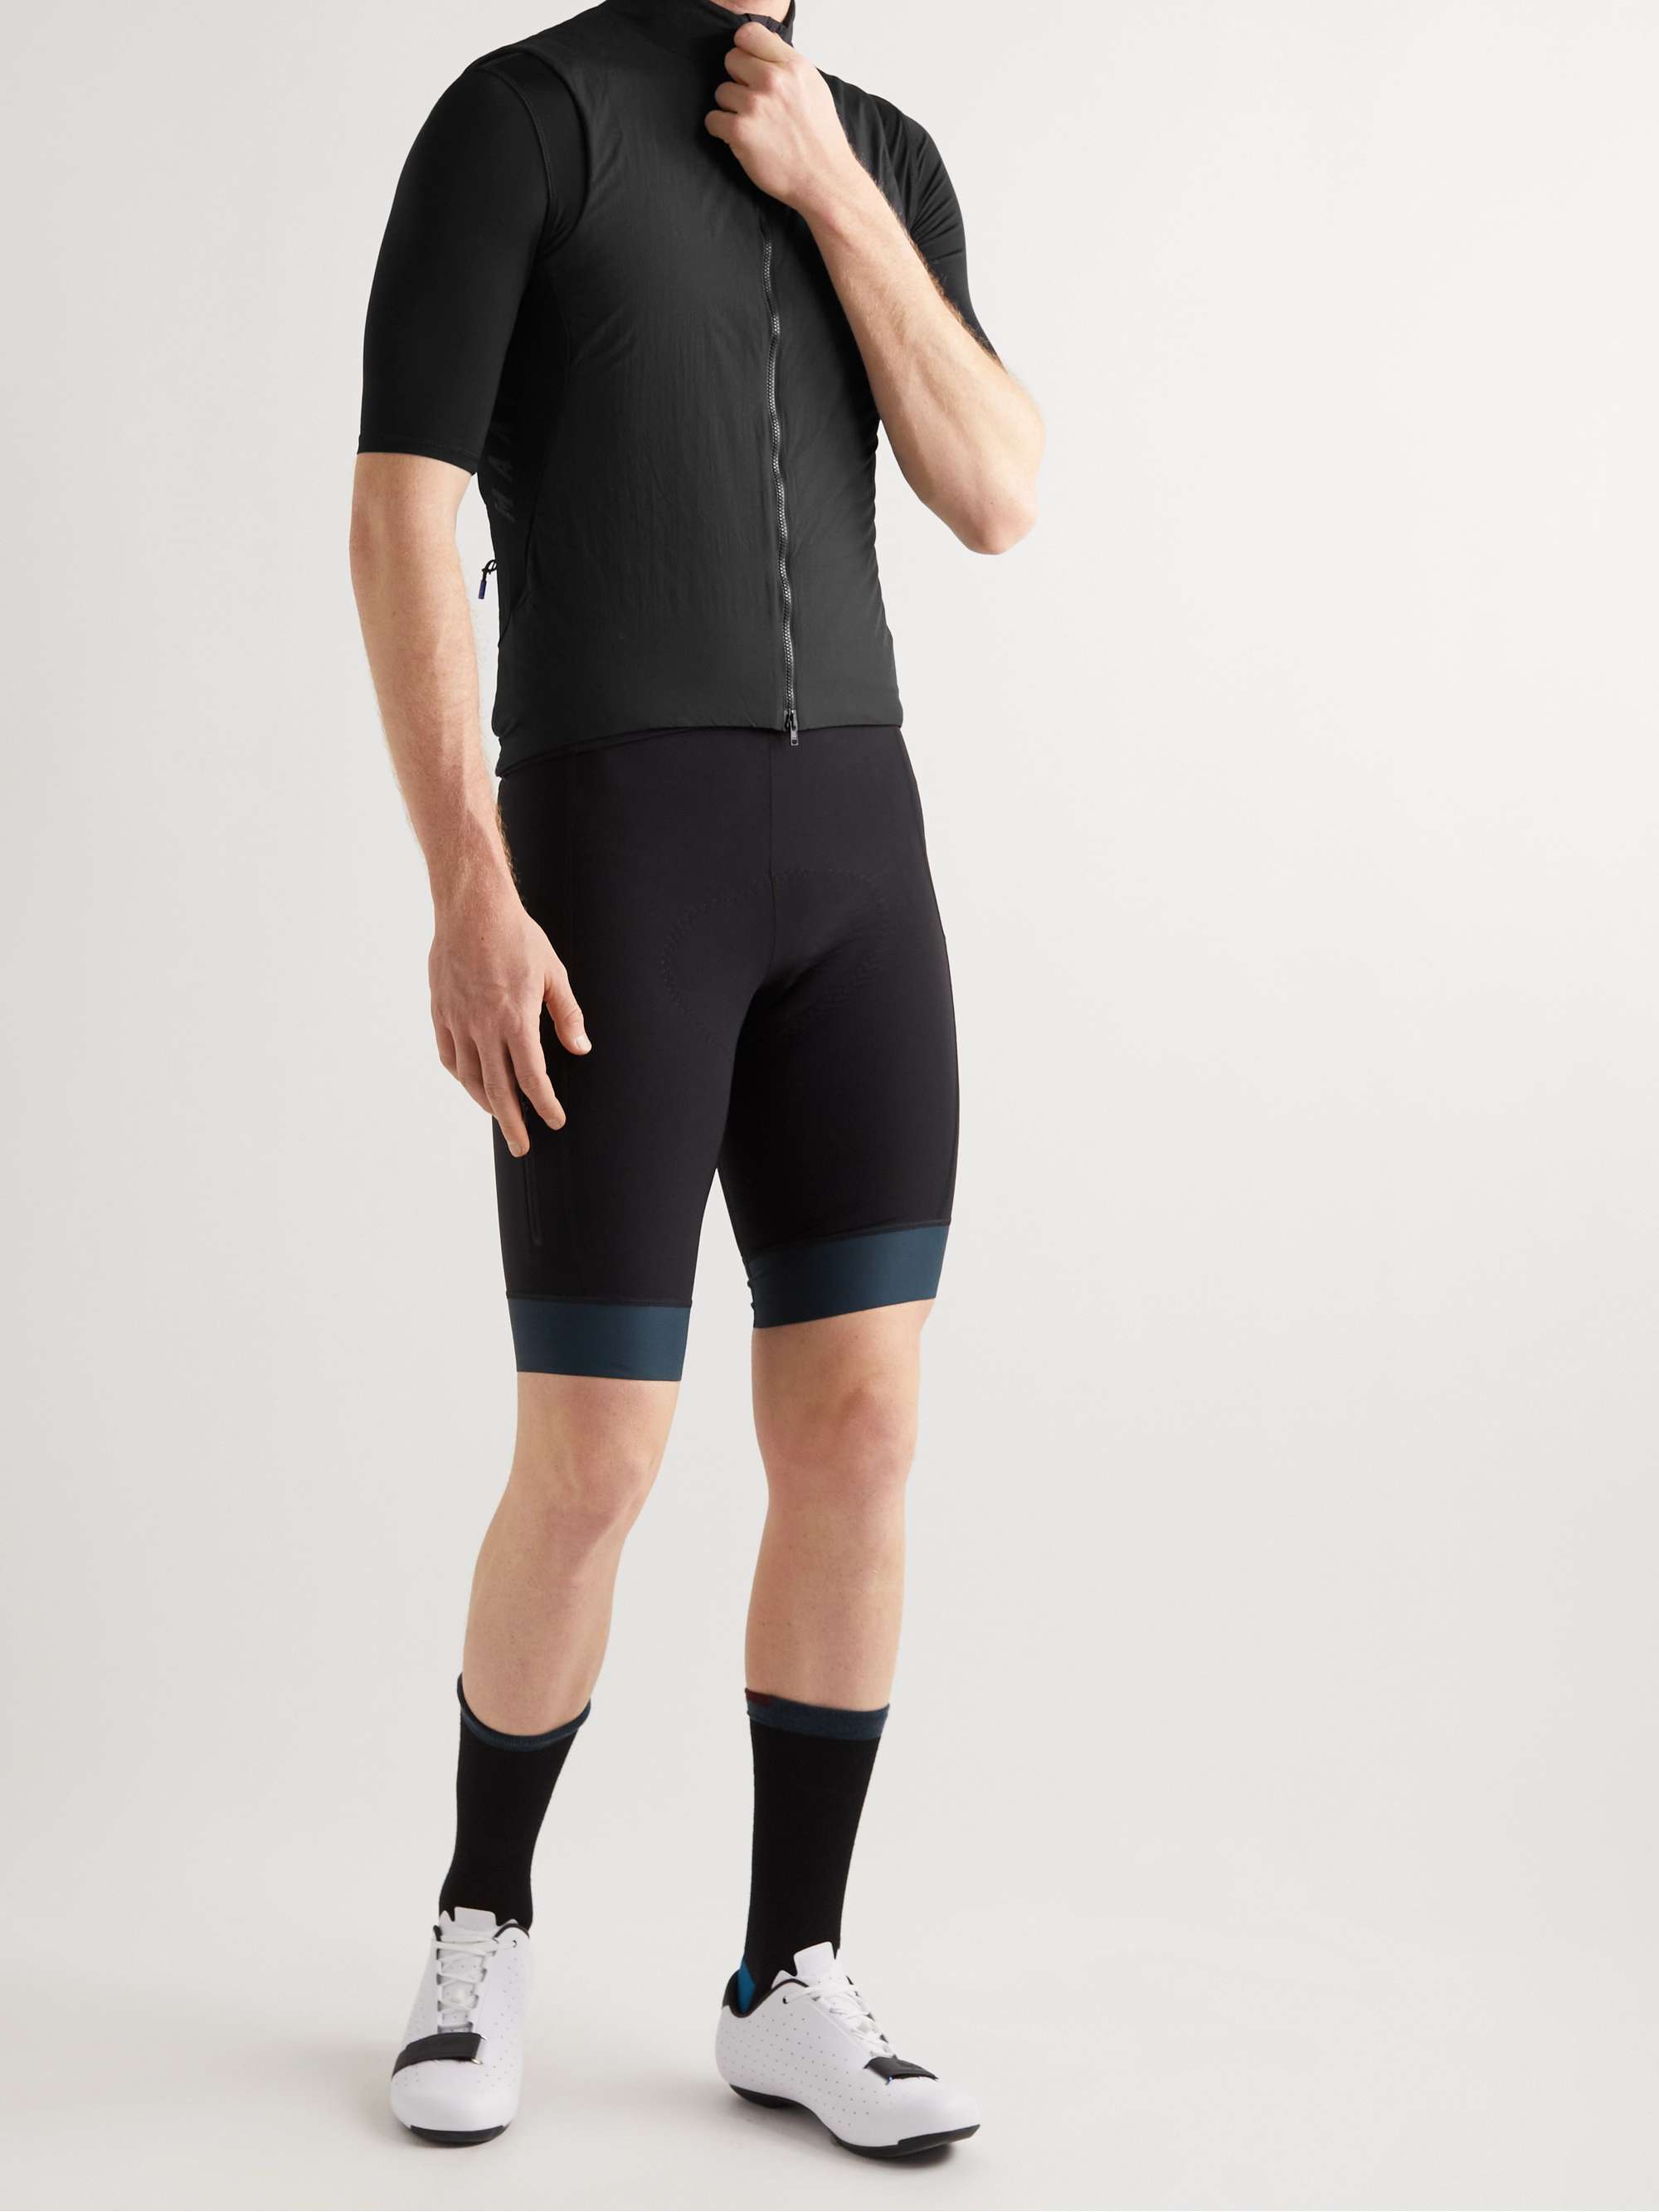 MAAP Alt-Road Thermal Slim-Fit Shell Cycling Gilet for Men | MR PORTER